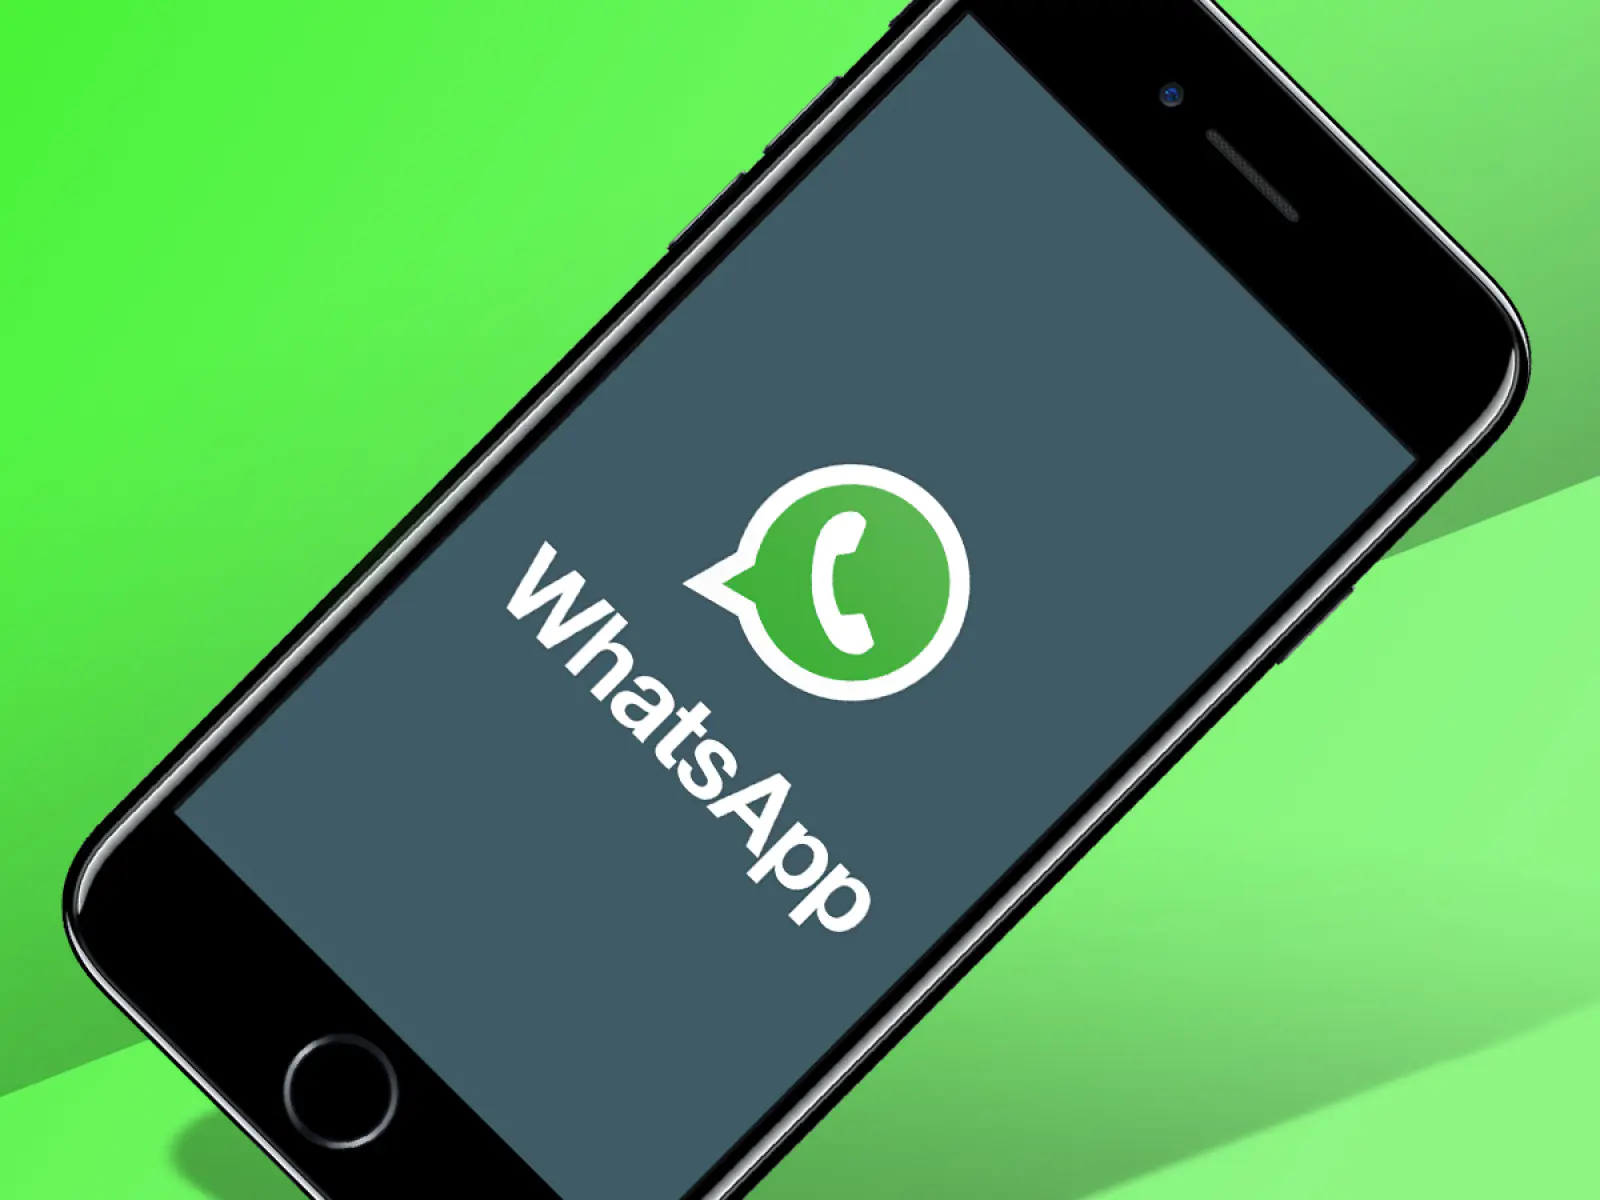 Way of replying to the status of WhatsApp contact is changing, the hidden reply bar will now be visible